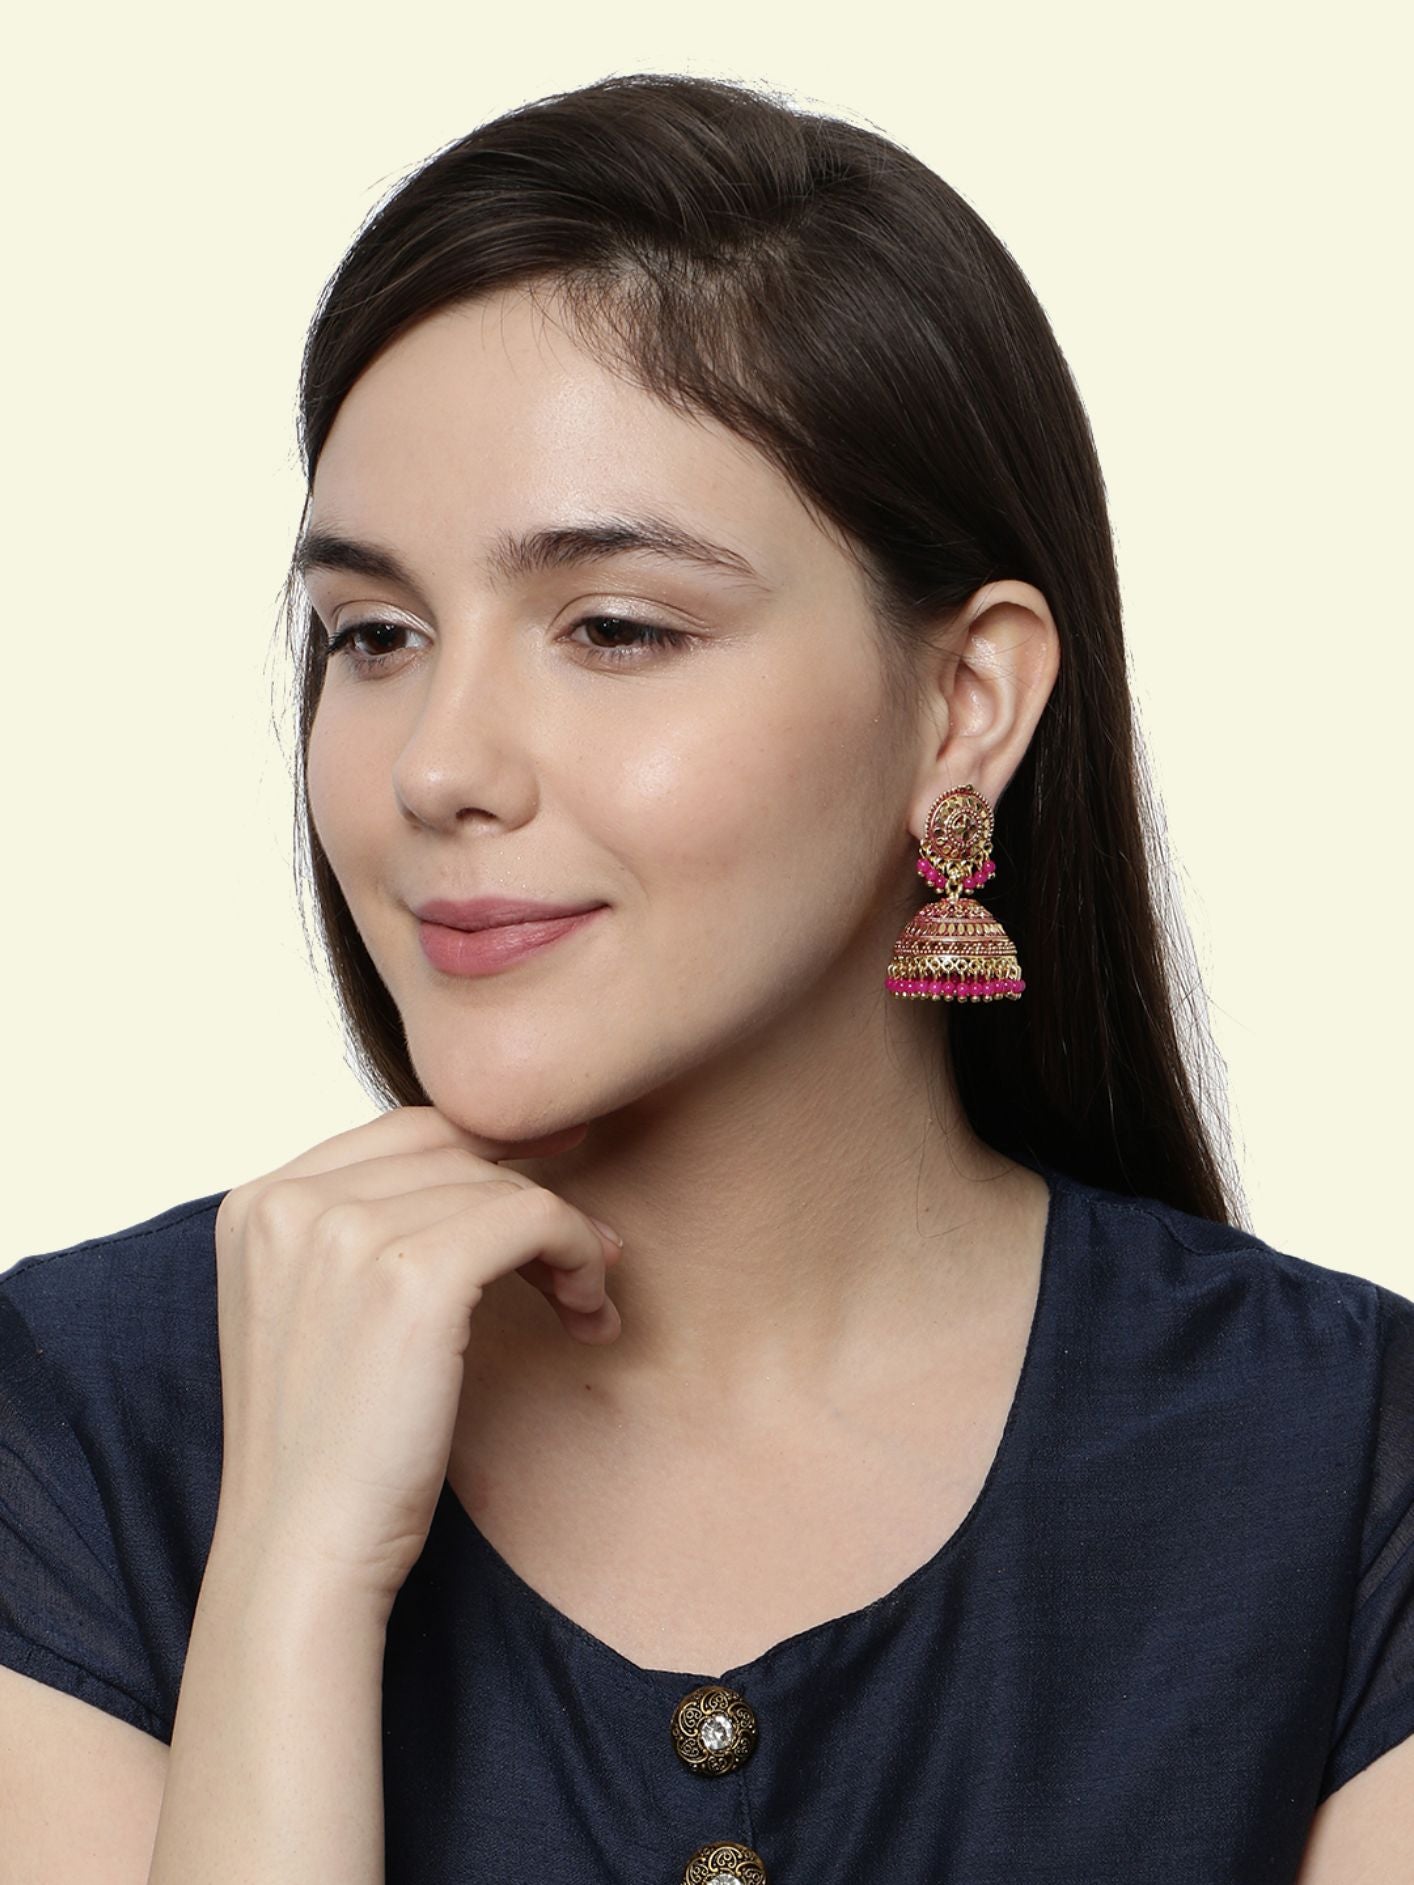 Women's Gold Plated Pink Dome Shaped Enamelled Jhumkas - Anikas Creation